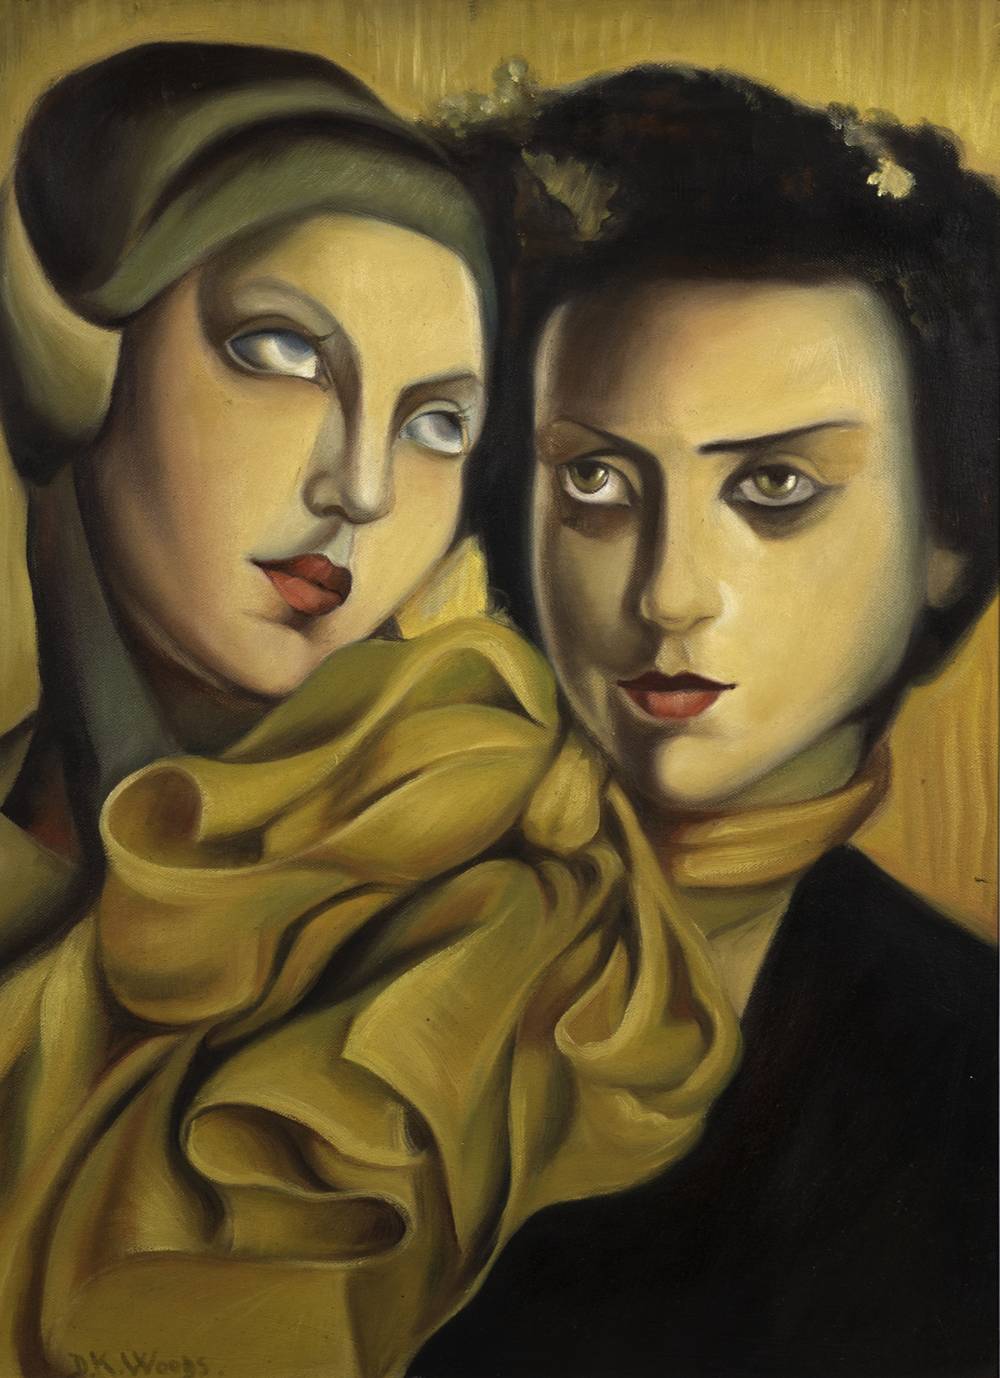 PET SISTER by D. K. Woods sold for 200 at Whyte's Auctions